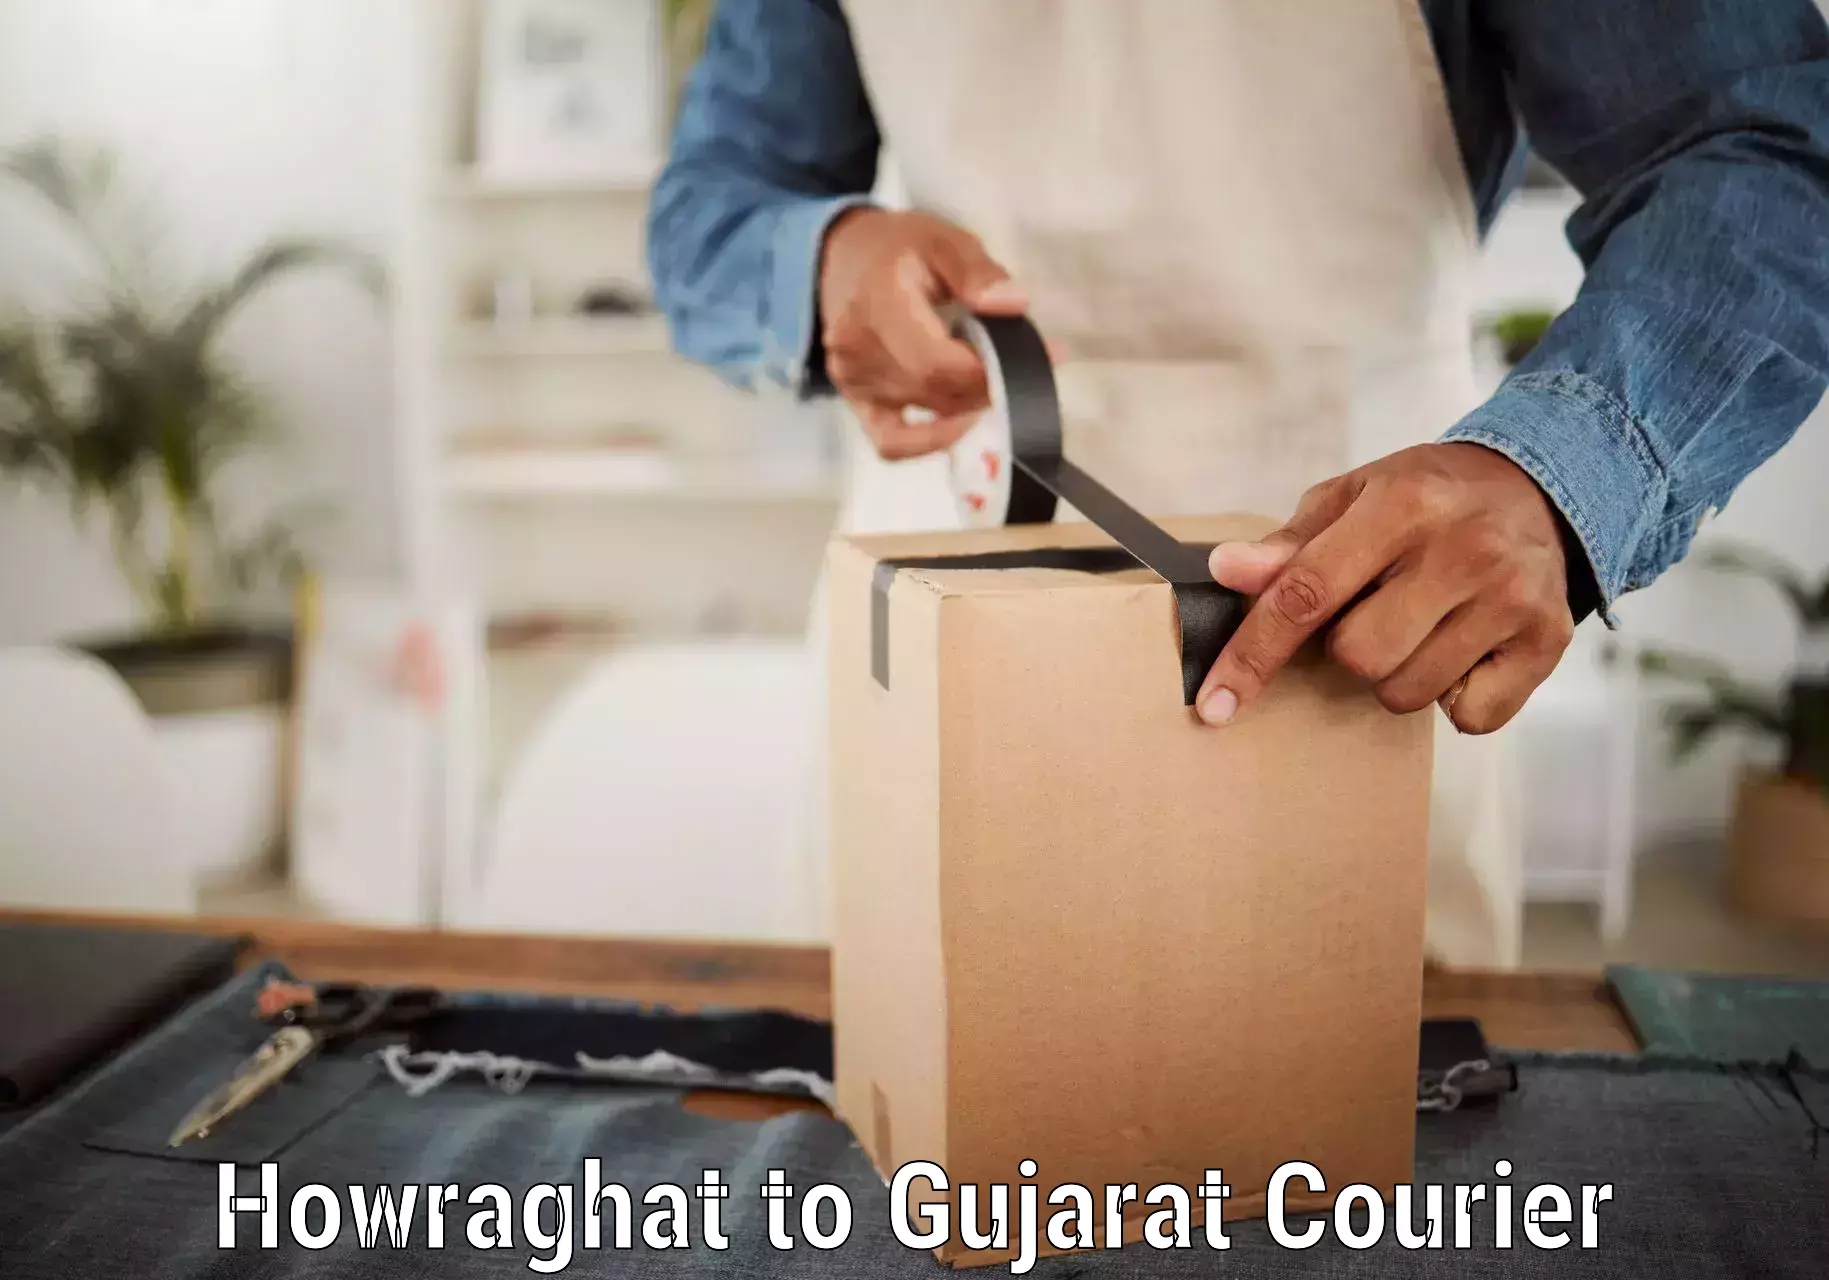 24-hour courier service Howraghat to Jambusar